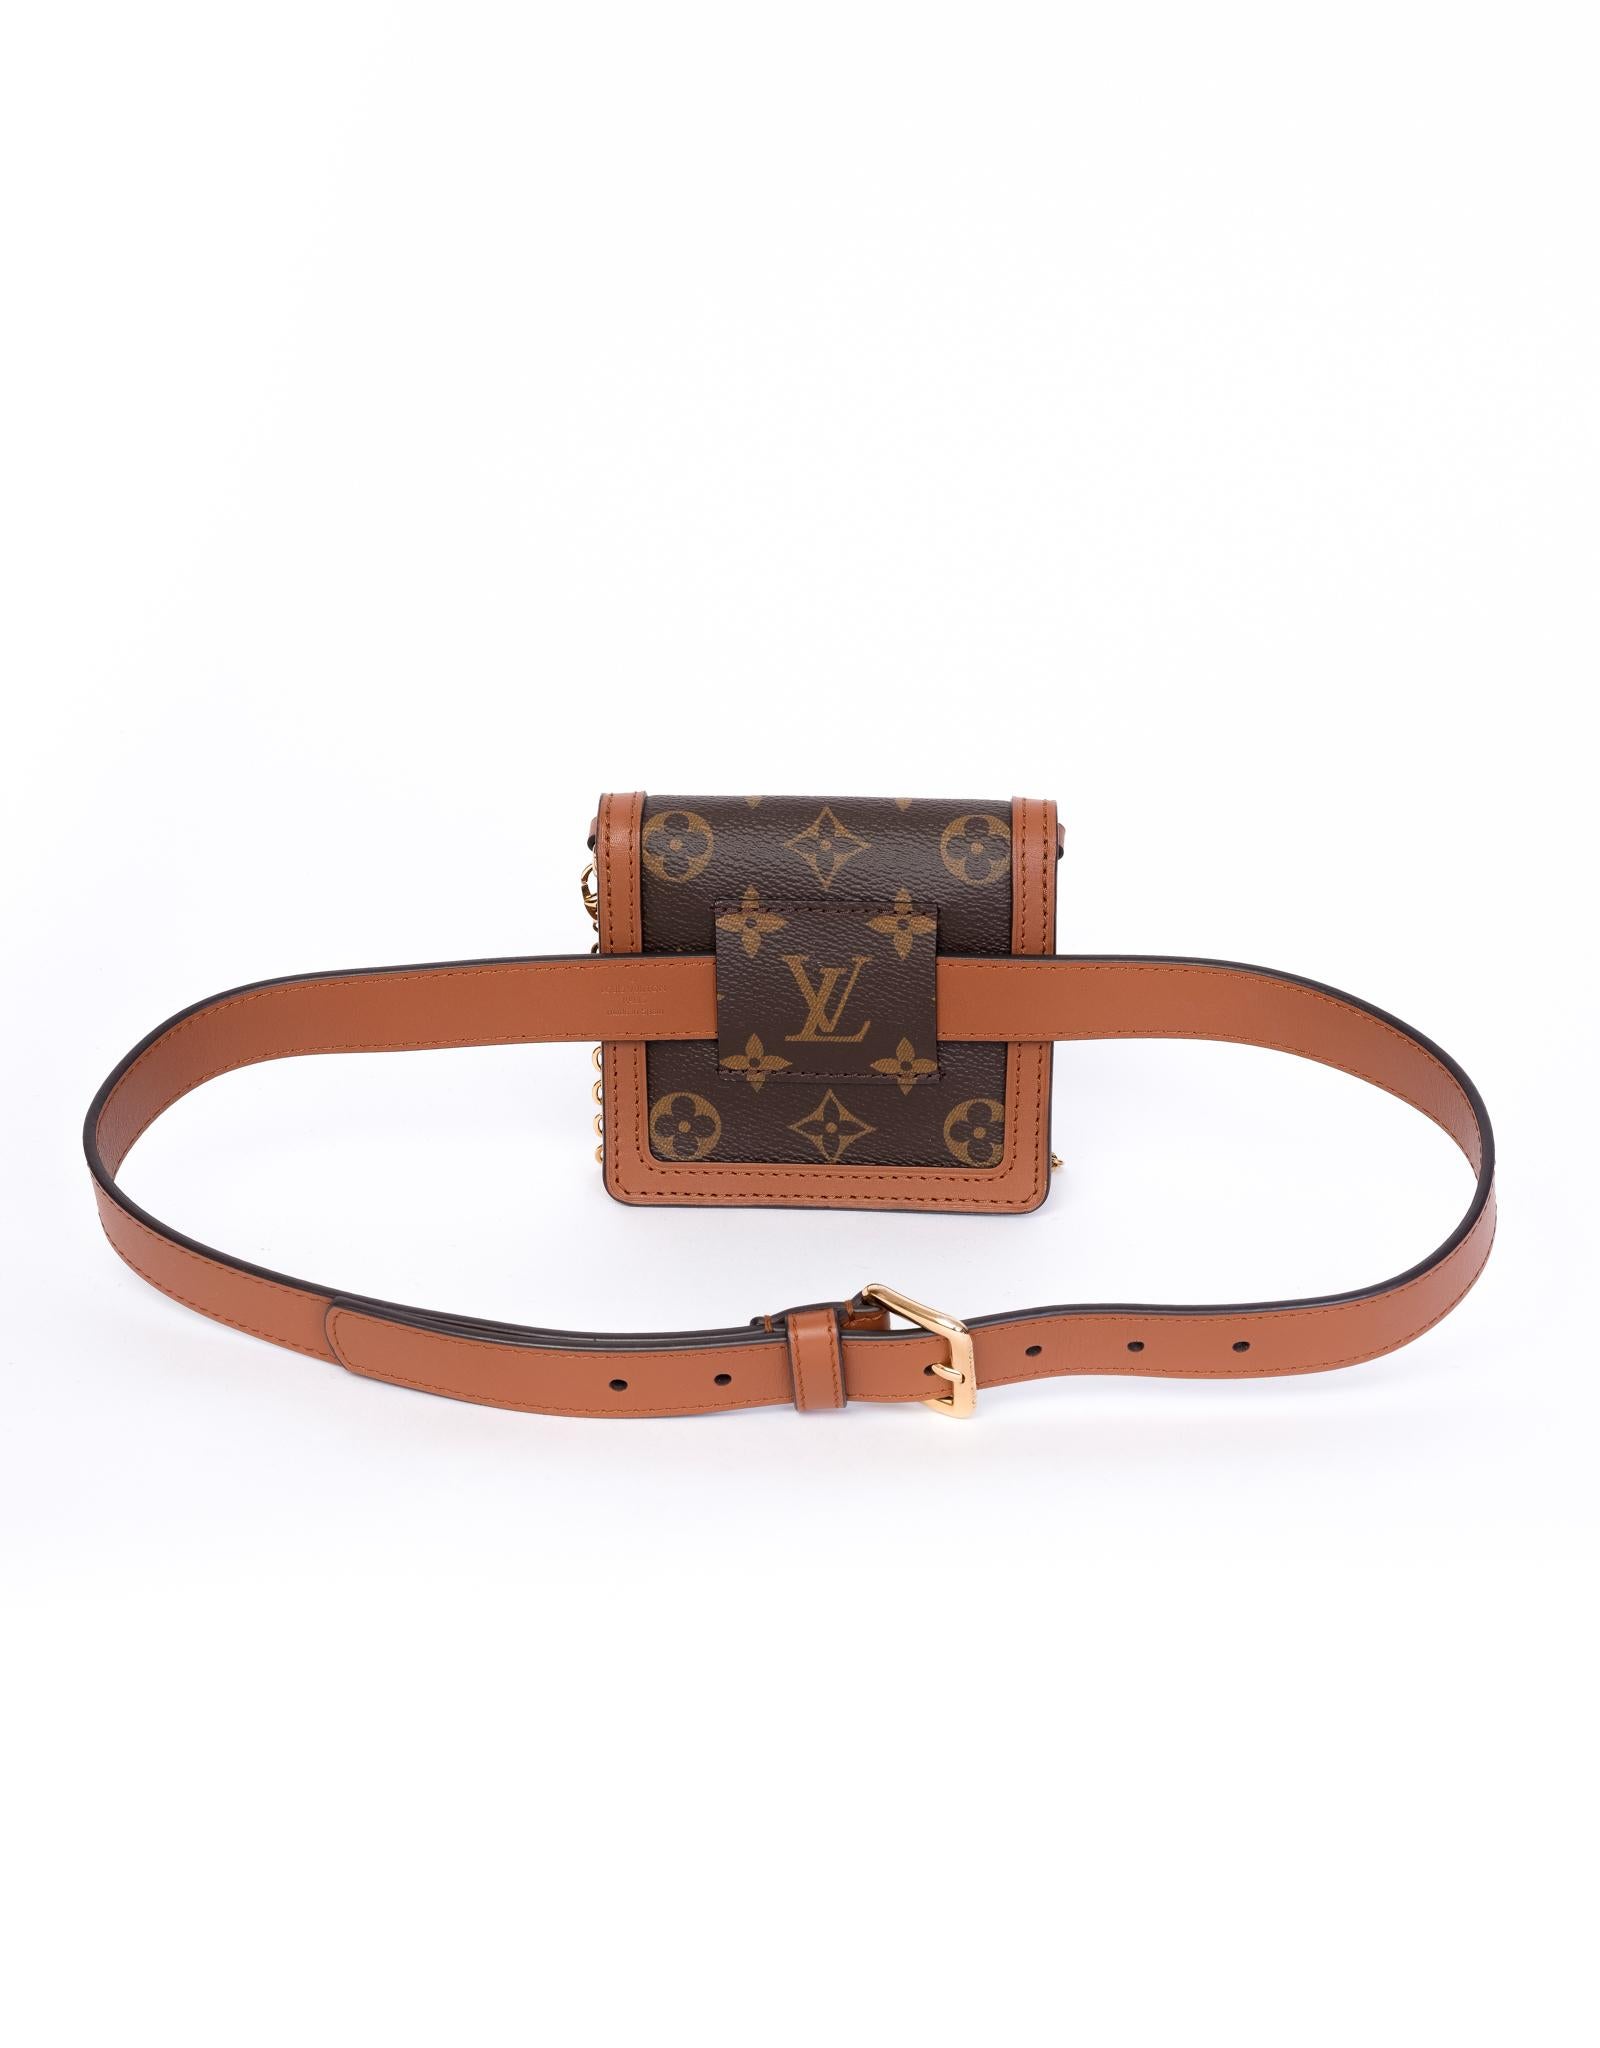 The Bumbag Dauphine BB is a tiny belt-pouch made of Monogram and Monogram Reverse coated canvas with calf-leather trim. Featuring gold tone hardware, Dauphine signature lock on front flap, alcantara interior with zip pocket and card slot. It can